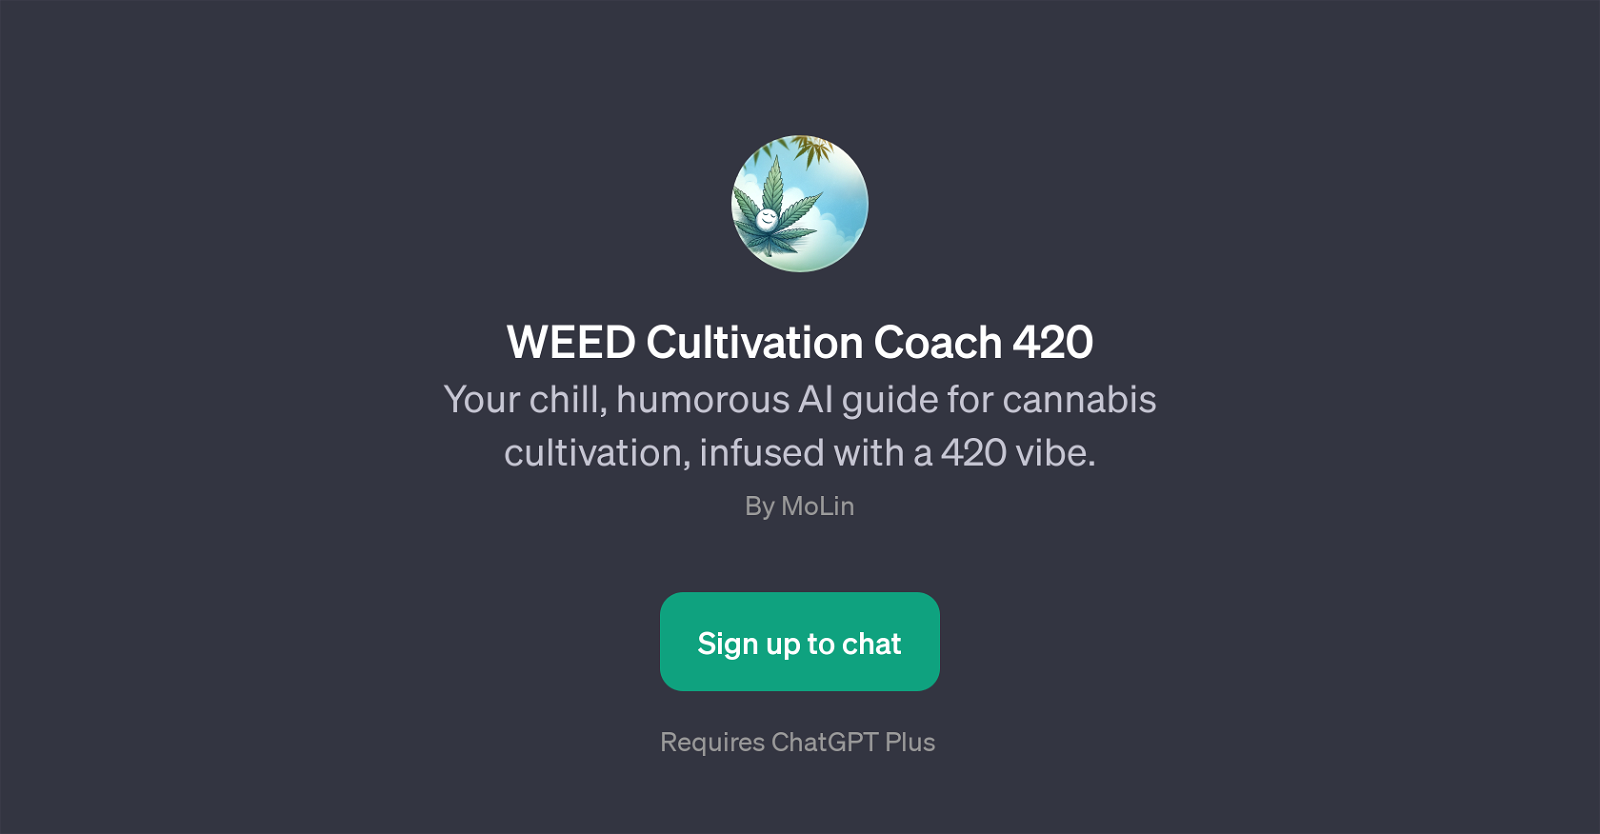 WEED Cultivation Coach 420 website